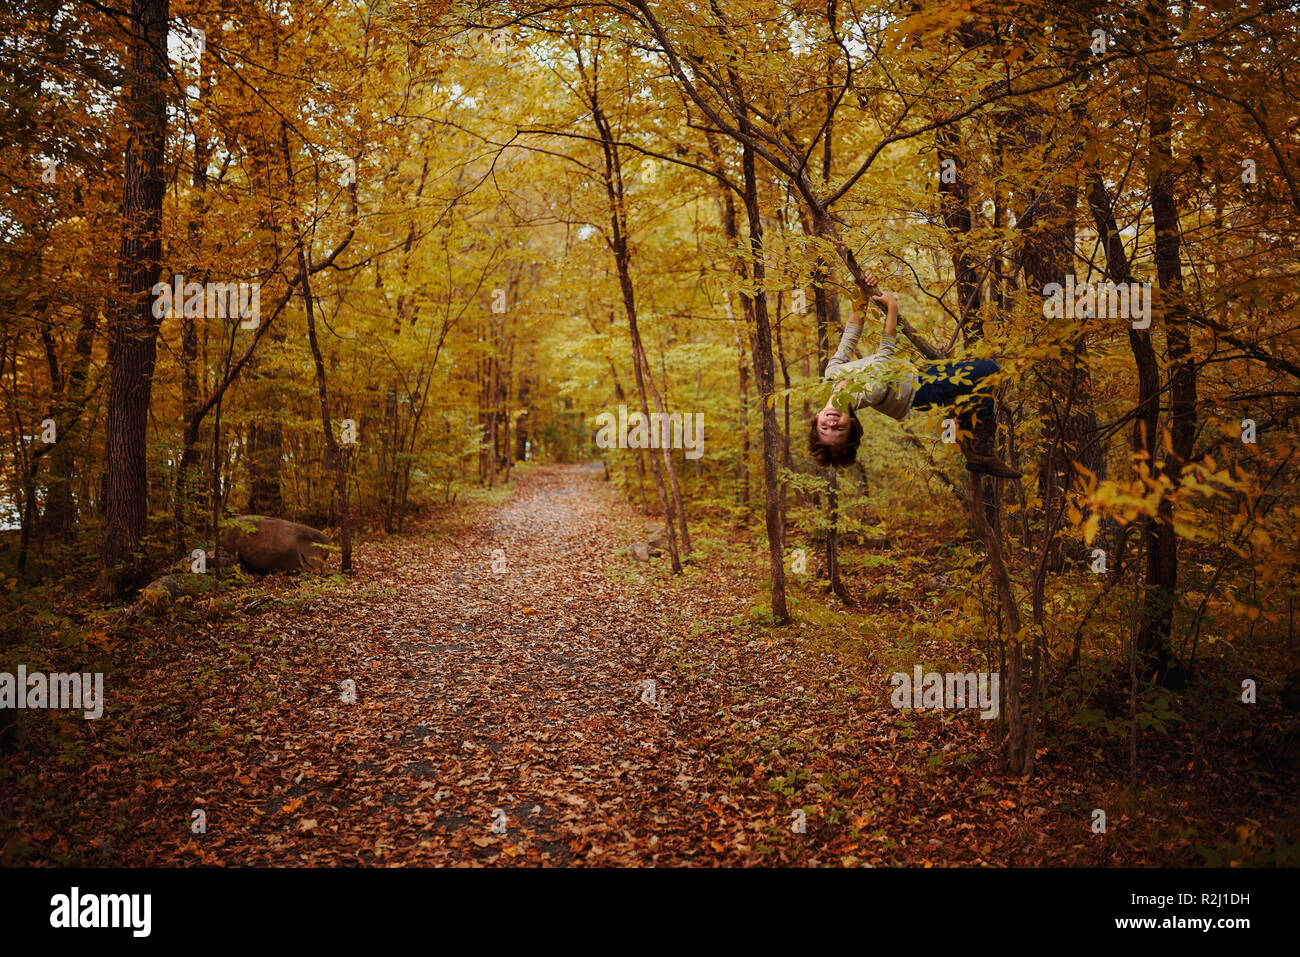 Boy hanging off a tree branch in the forest, United States Stock Photo